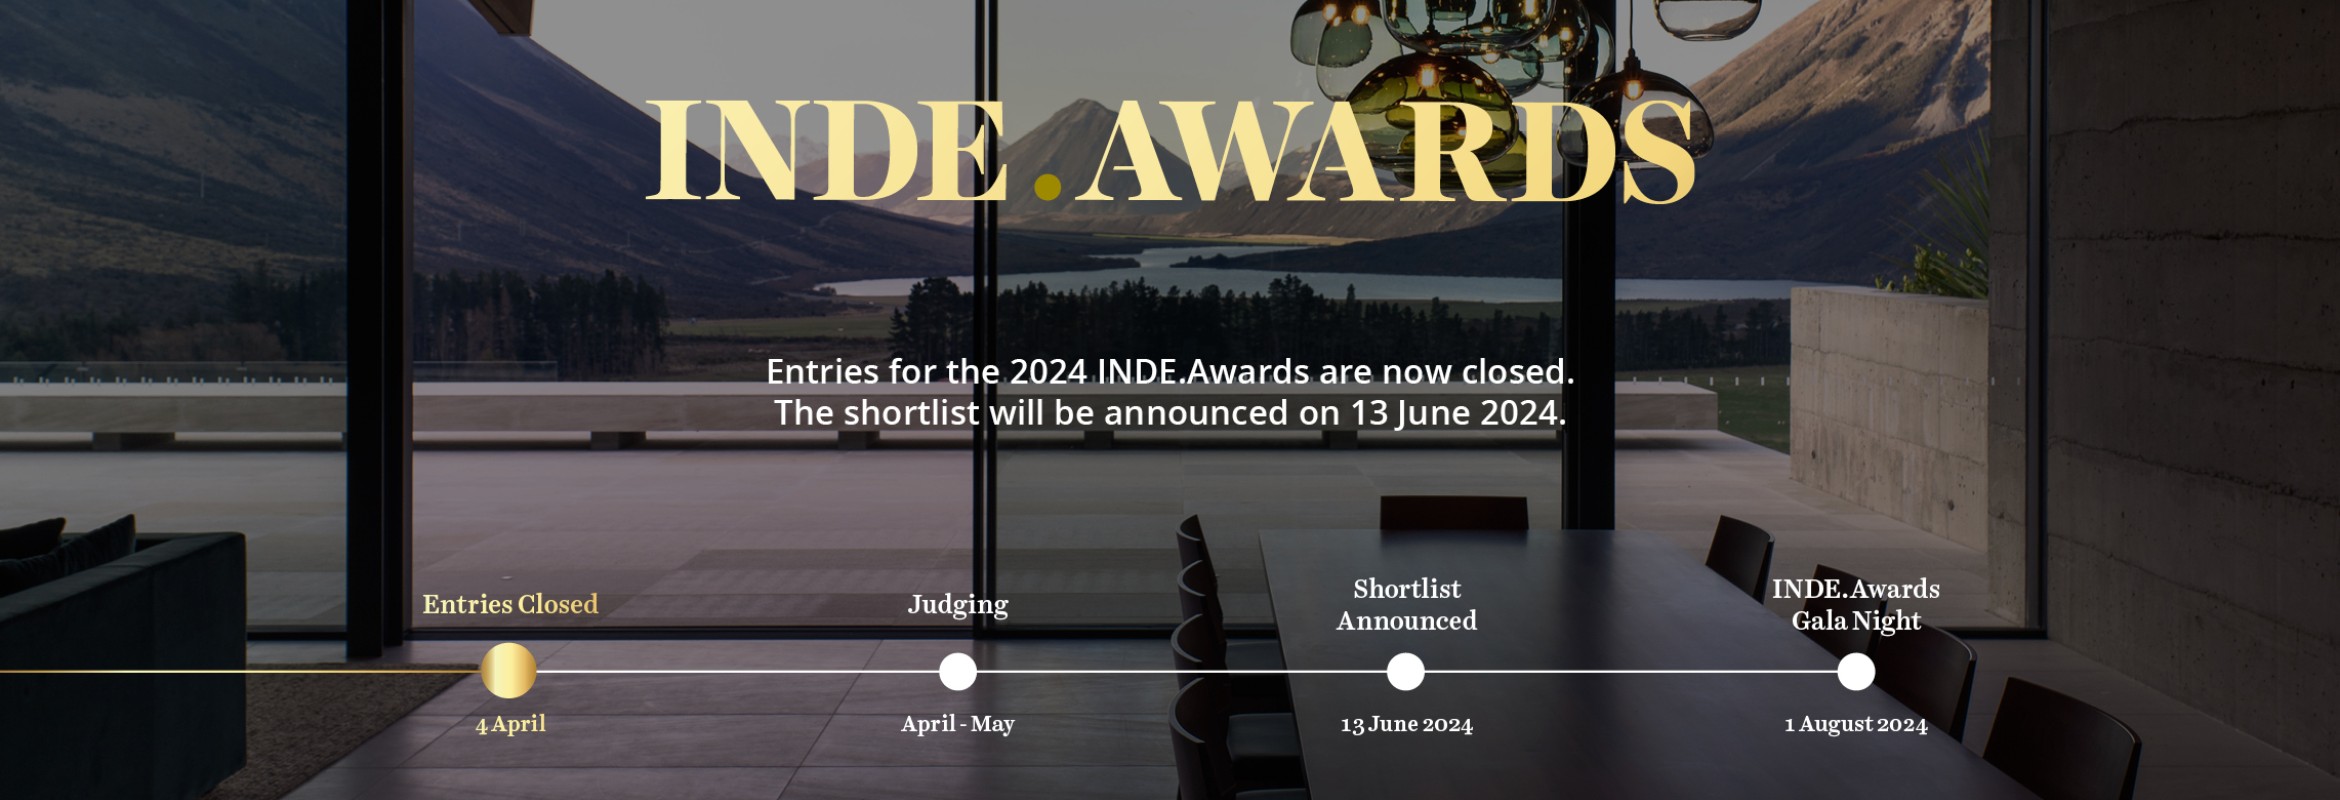 Entries for the 2024 INDE.Awards have now closed.